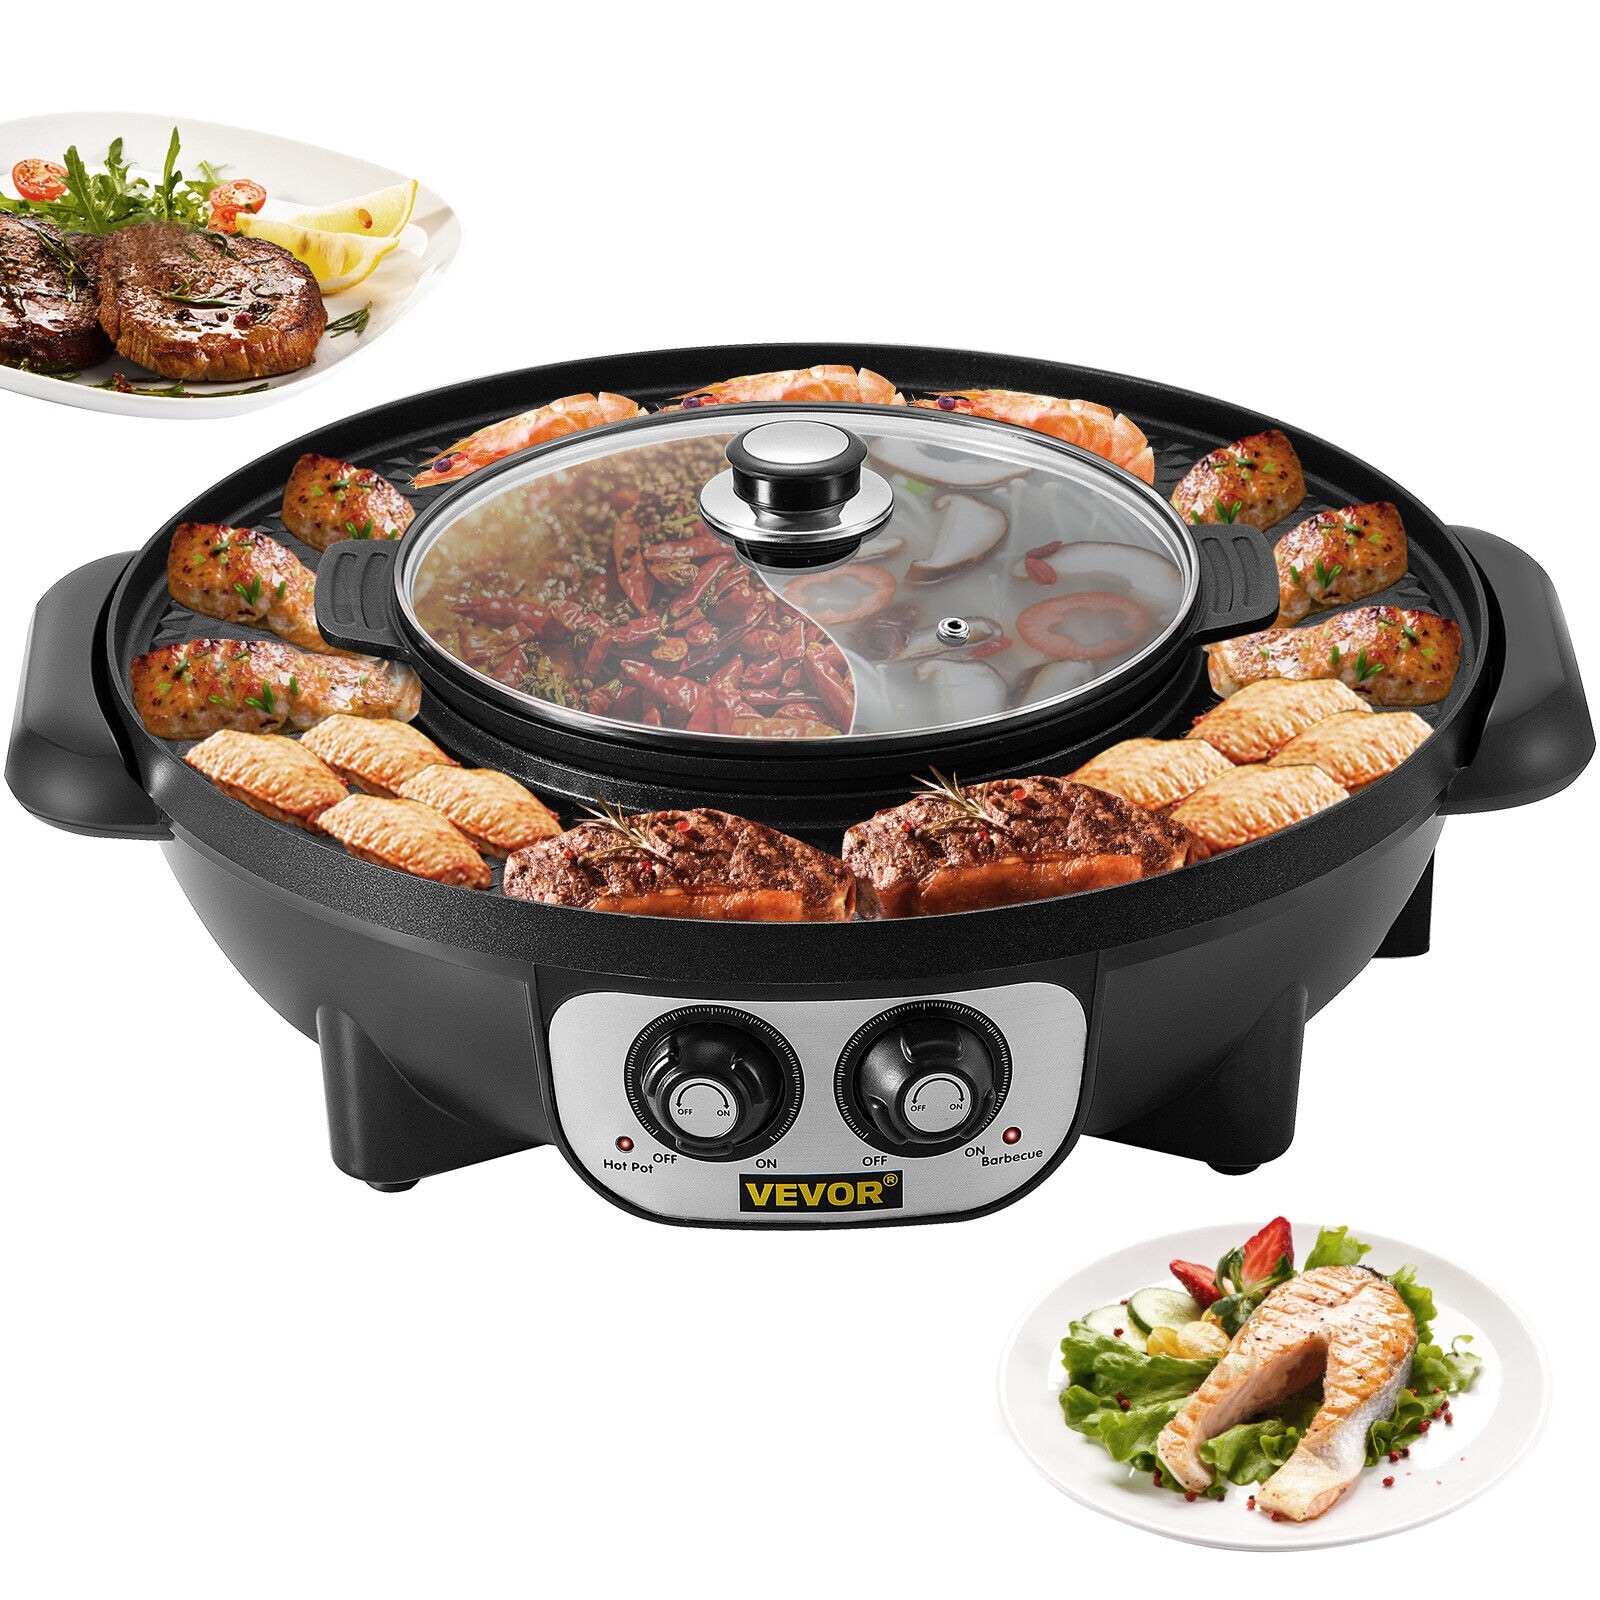 https://ak1.ostkcdn.com/images/products/is/images/direct/8d54711d2adbcf4a4549e7e60e11300be82c67d3/VEVOR-2-in-1-Electric-Grill-and-Hot-Pot-2200W-BBQ-Pan-Grill-and-Hot-Pot-Multifunctional-Teppanyaki-Grill-Pot-with-Dual-Temp-Ctrl.jpg